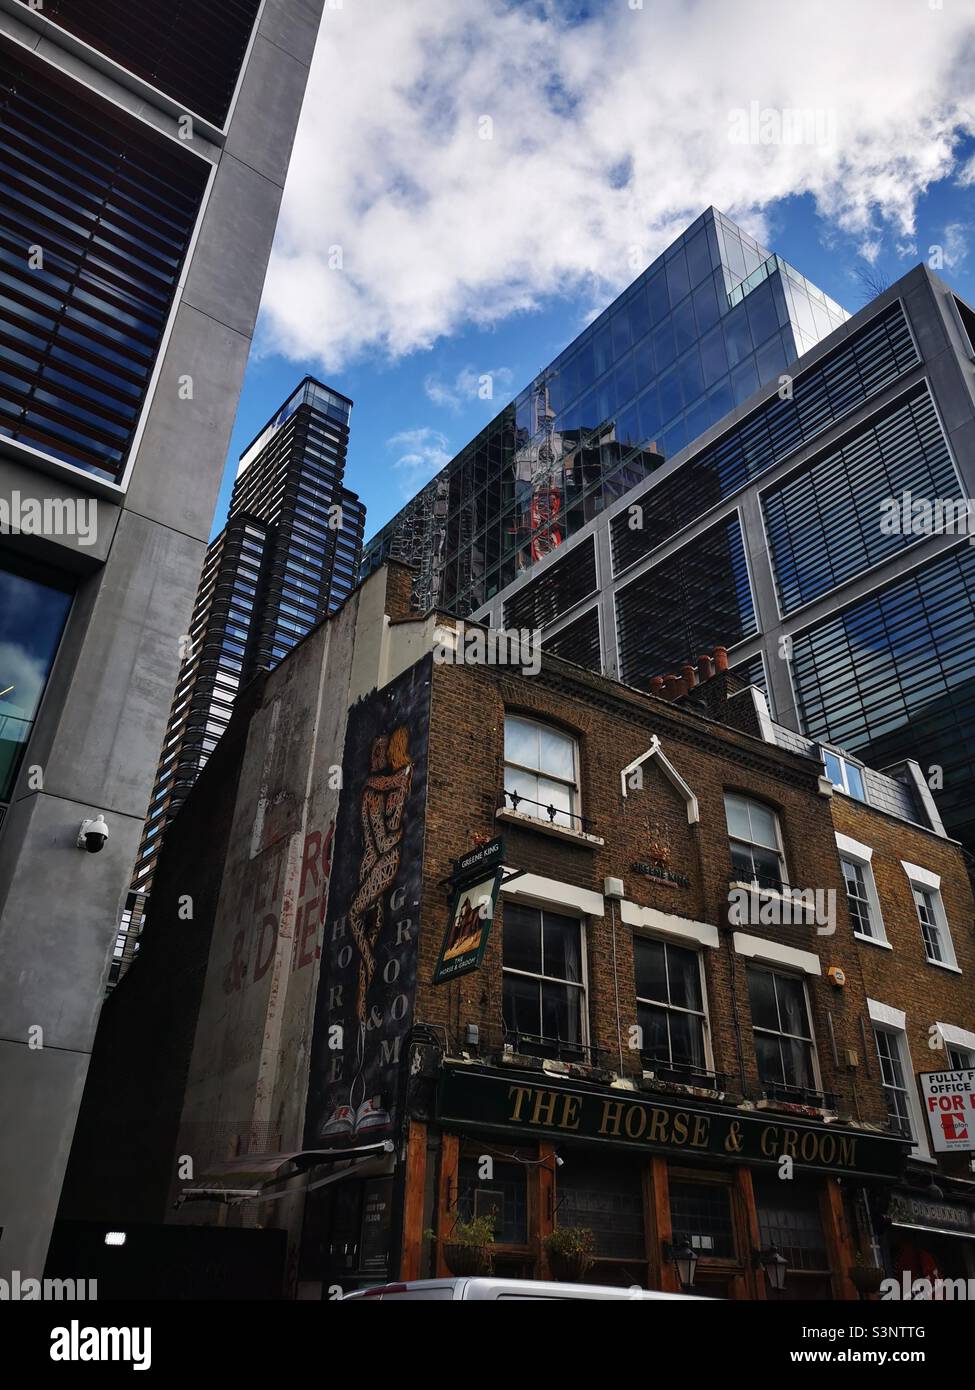 old and new architecture in London Stock Photo